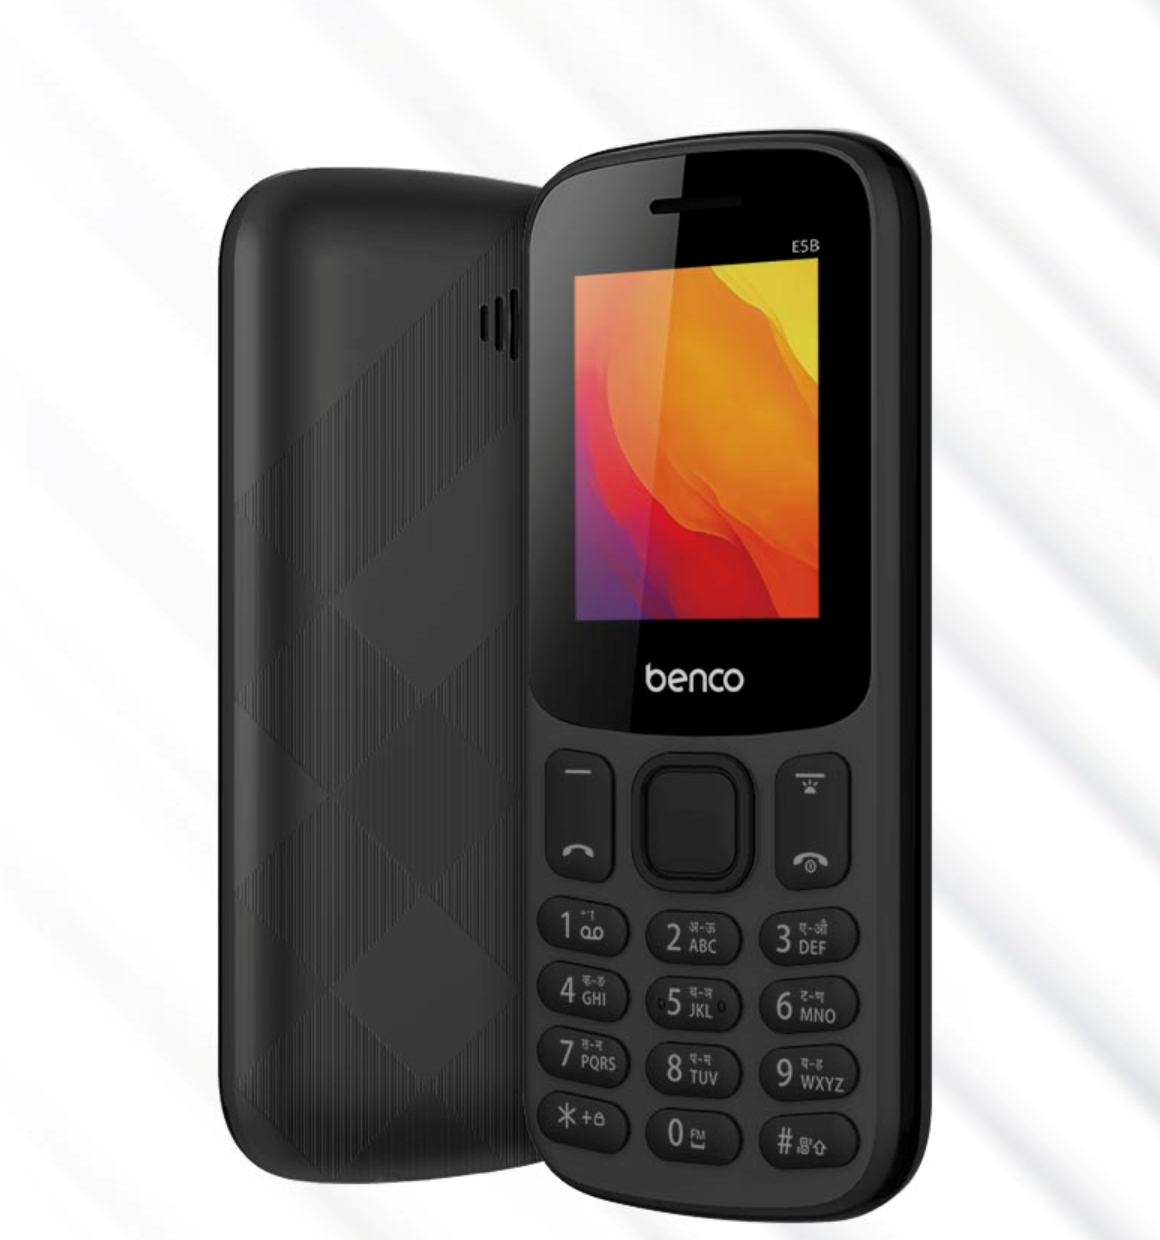 Benco E5B Feature Phone Review: Simplicity and Connectivity in One Package